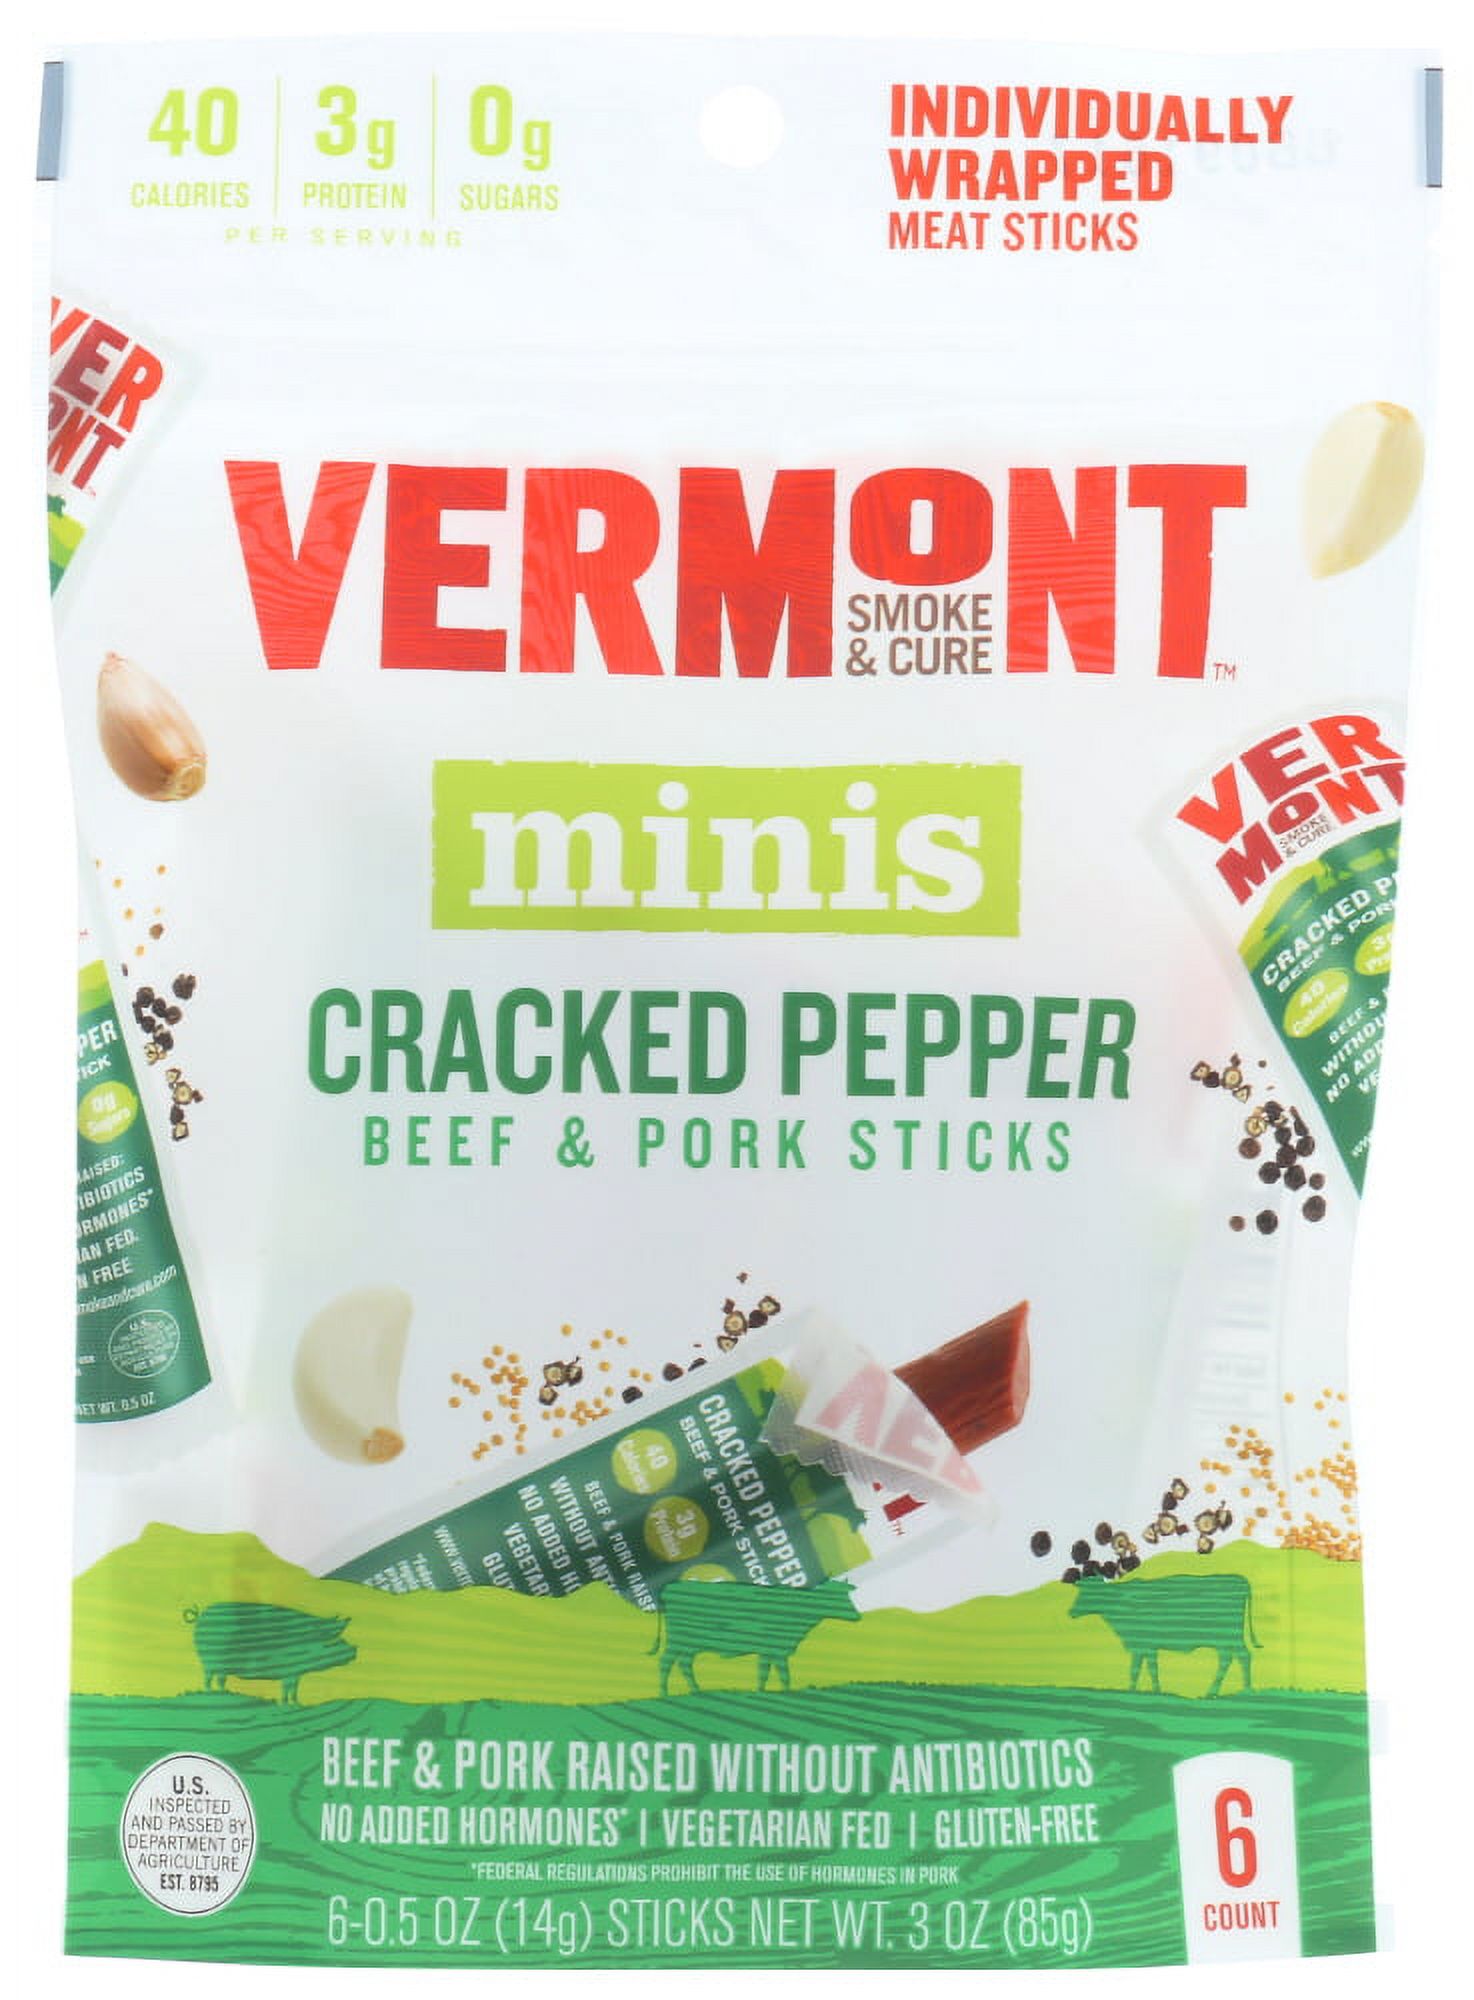 Vermont Smoke & Cure Minis Cracked Pepper Beef & Pork Sticks, 0.5 oz, 6 Count - image 1 of 6